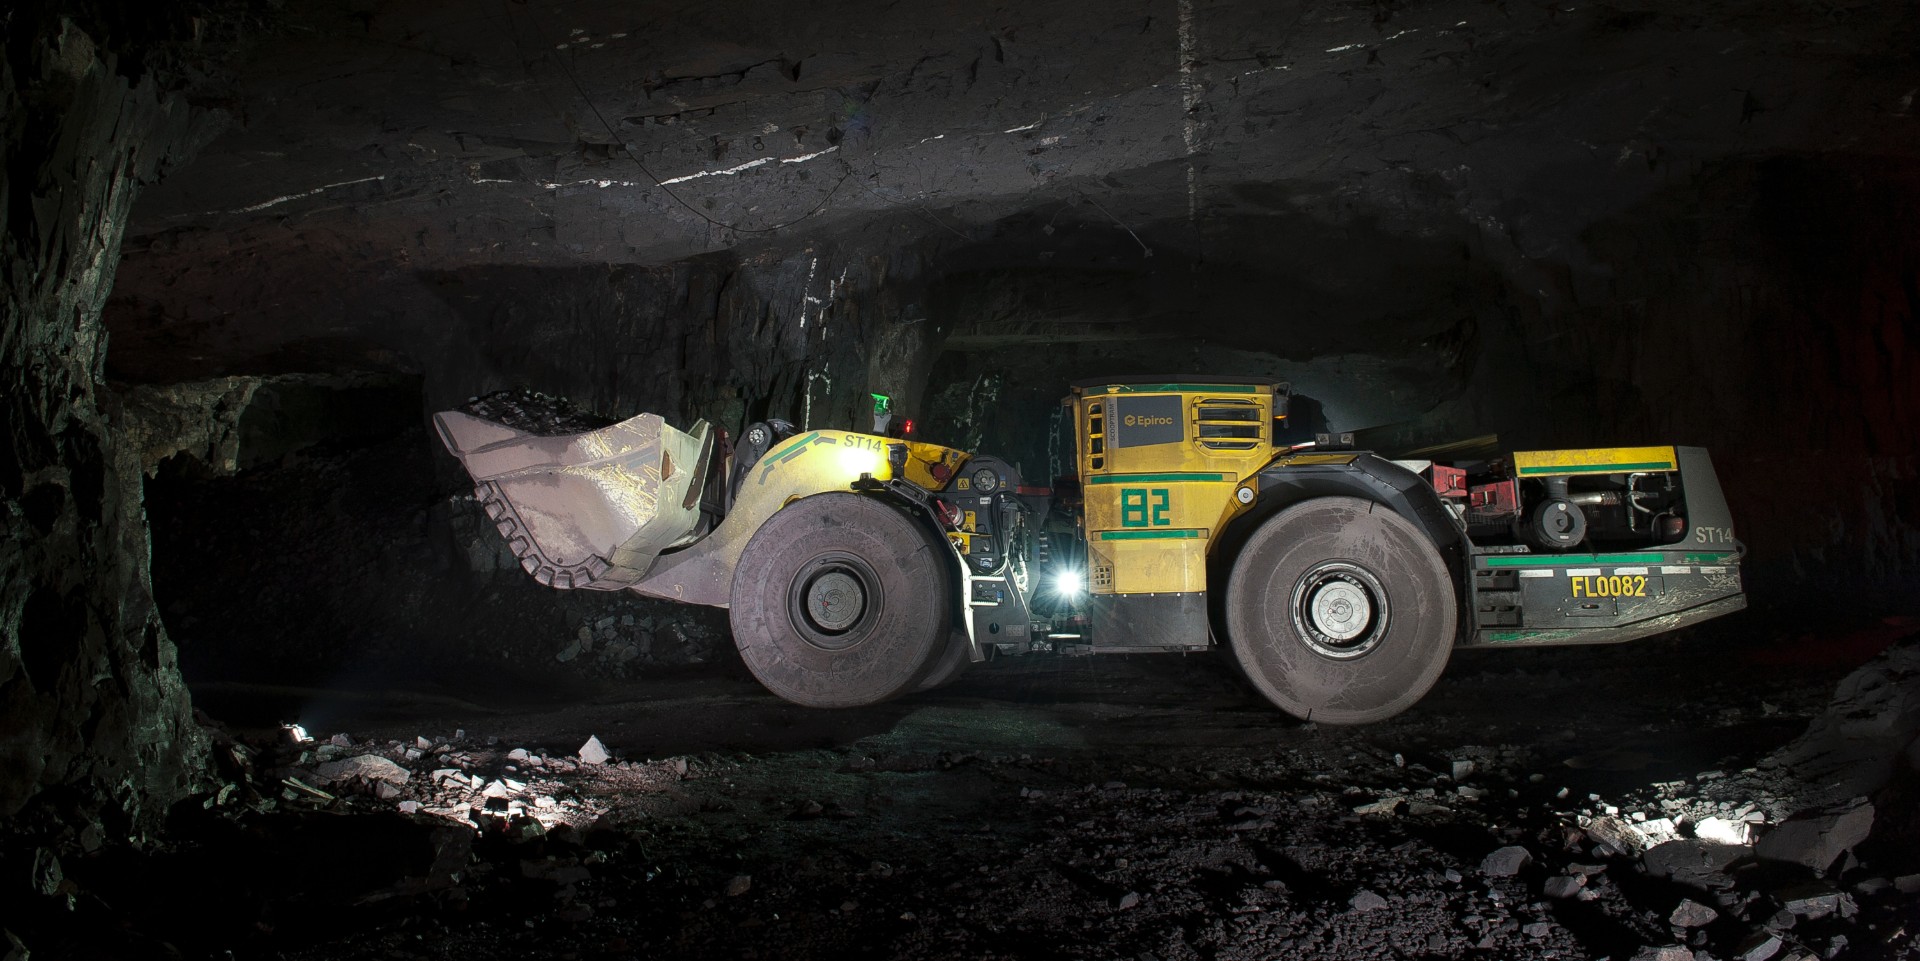 How to Control Diesel Particular Matter Exposures & Protect Miners